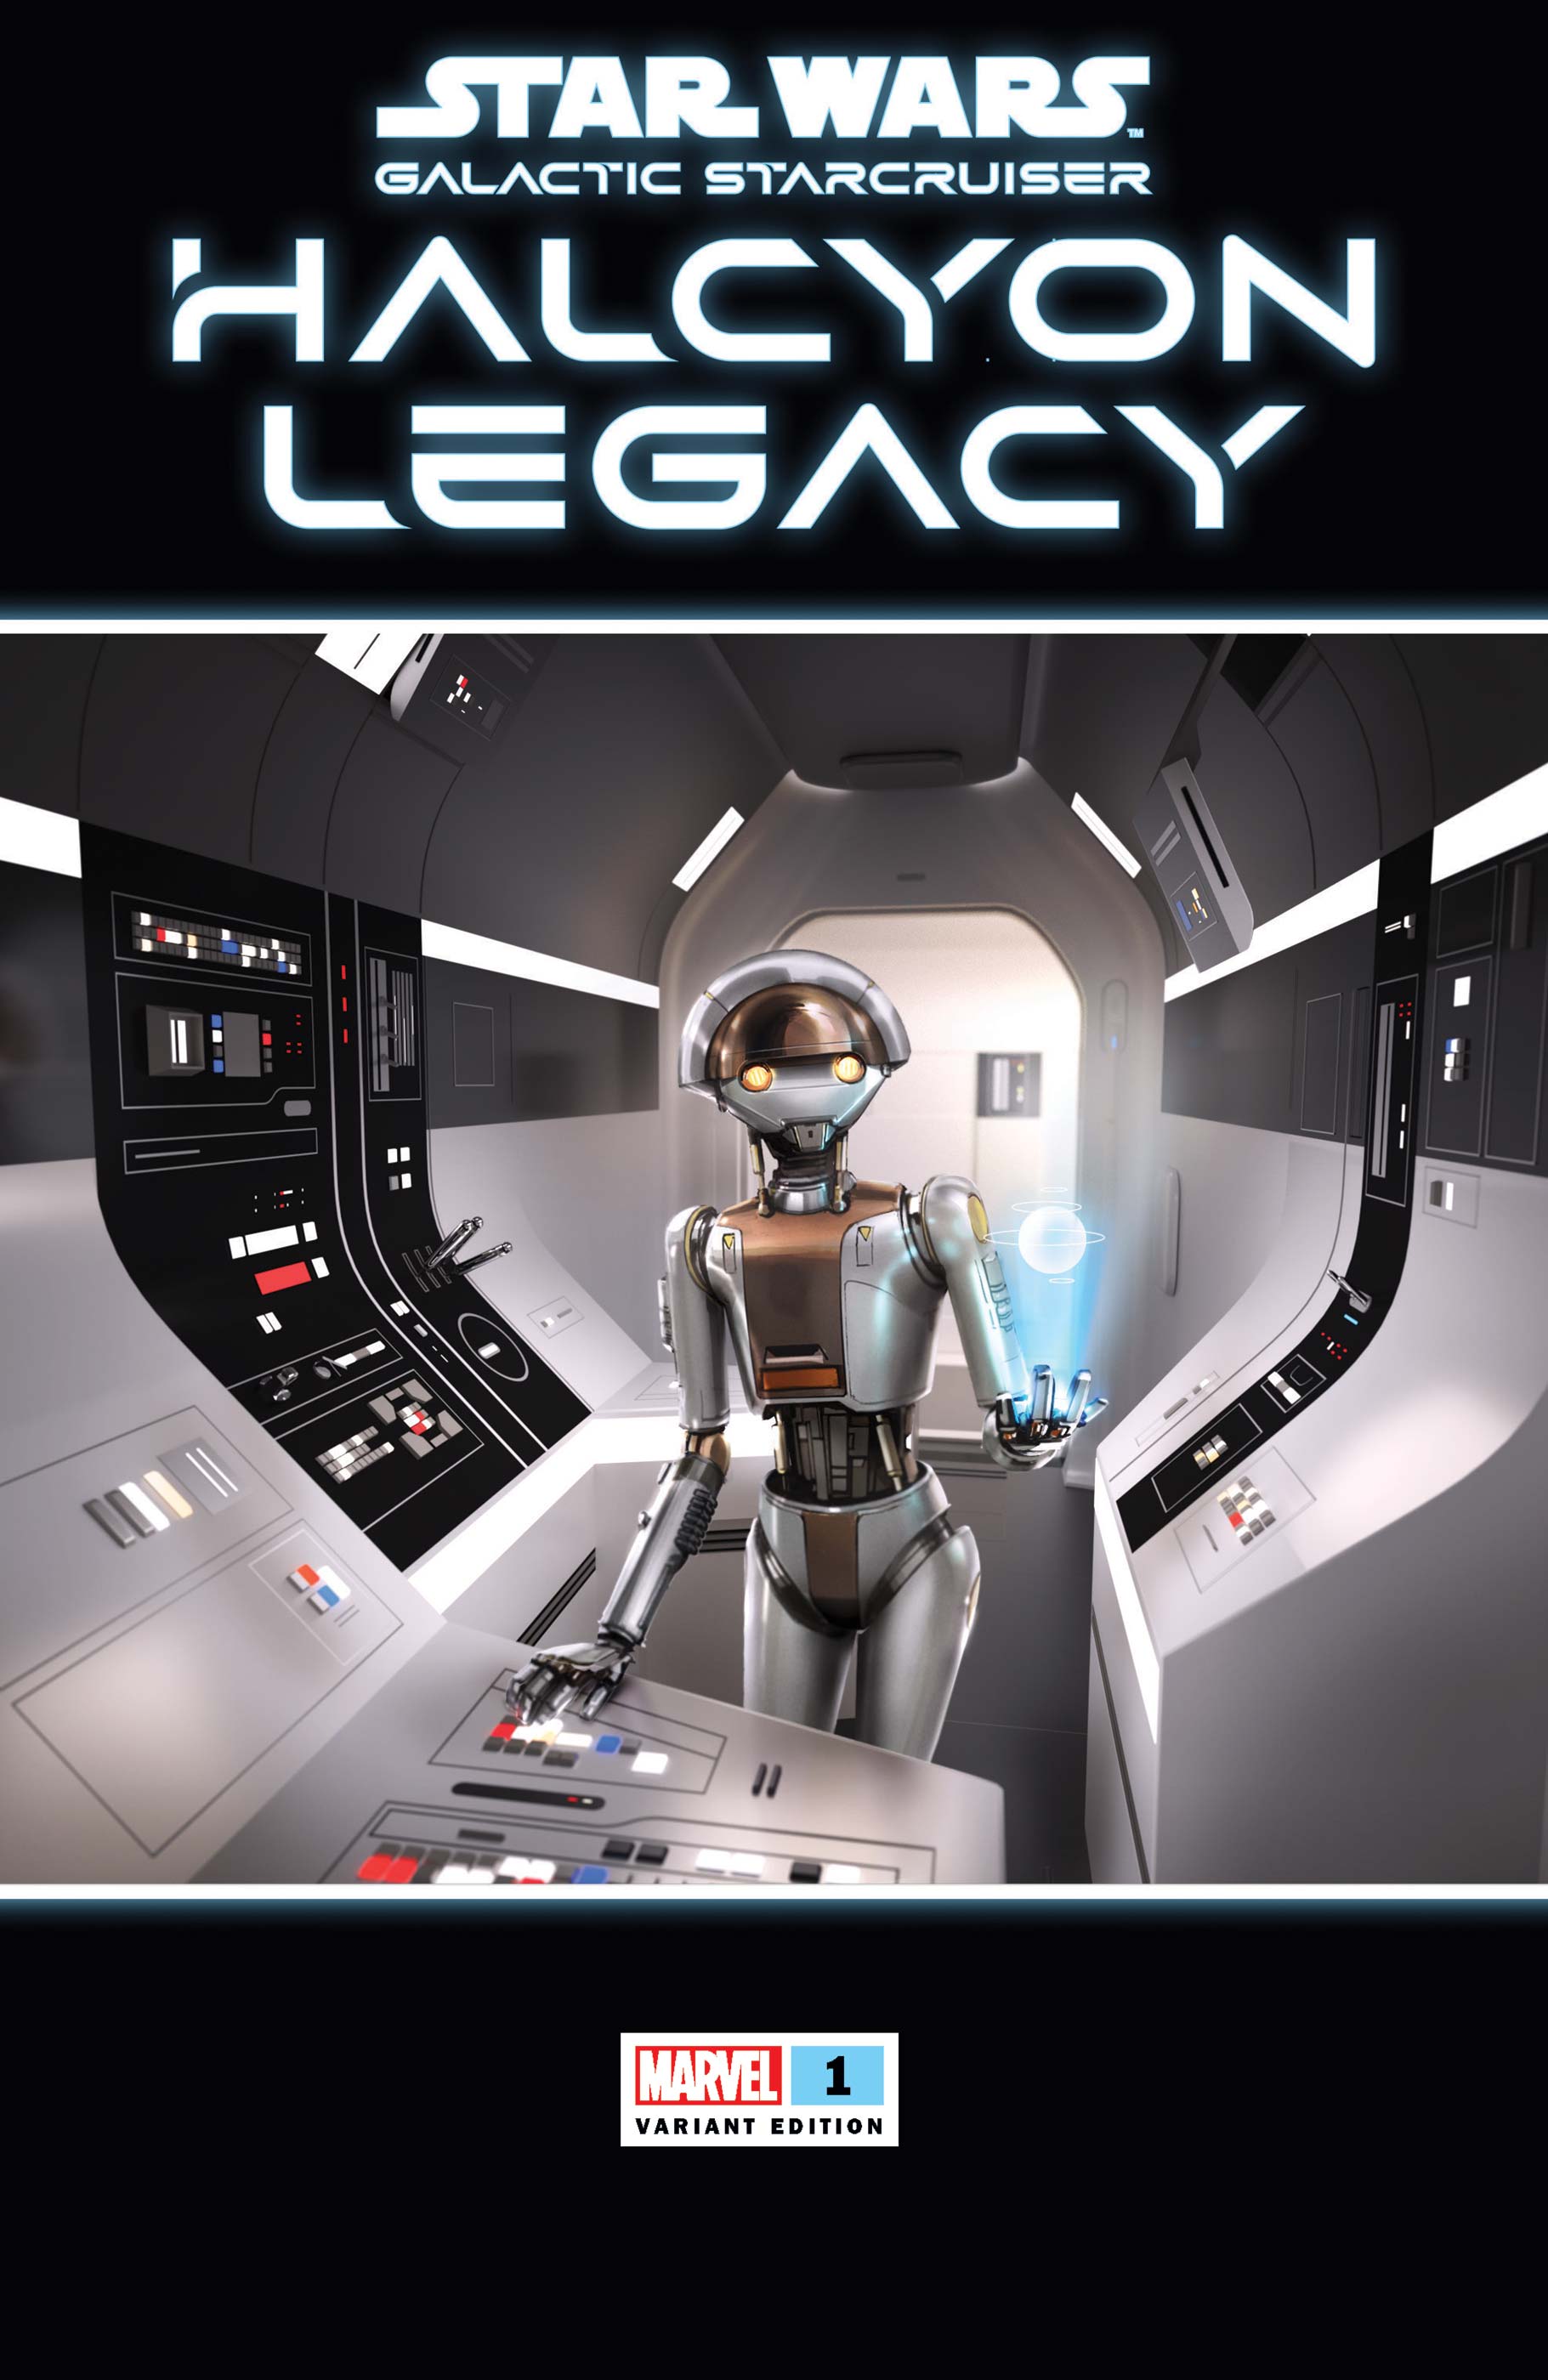 Star Wars: The Halcyon Legacy (2022) #1 (Variant)